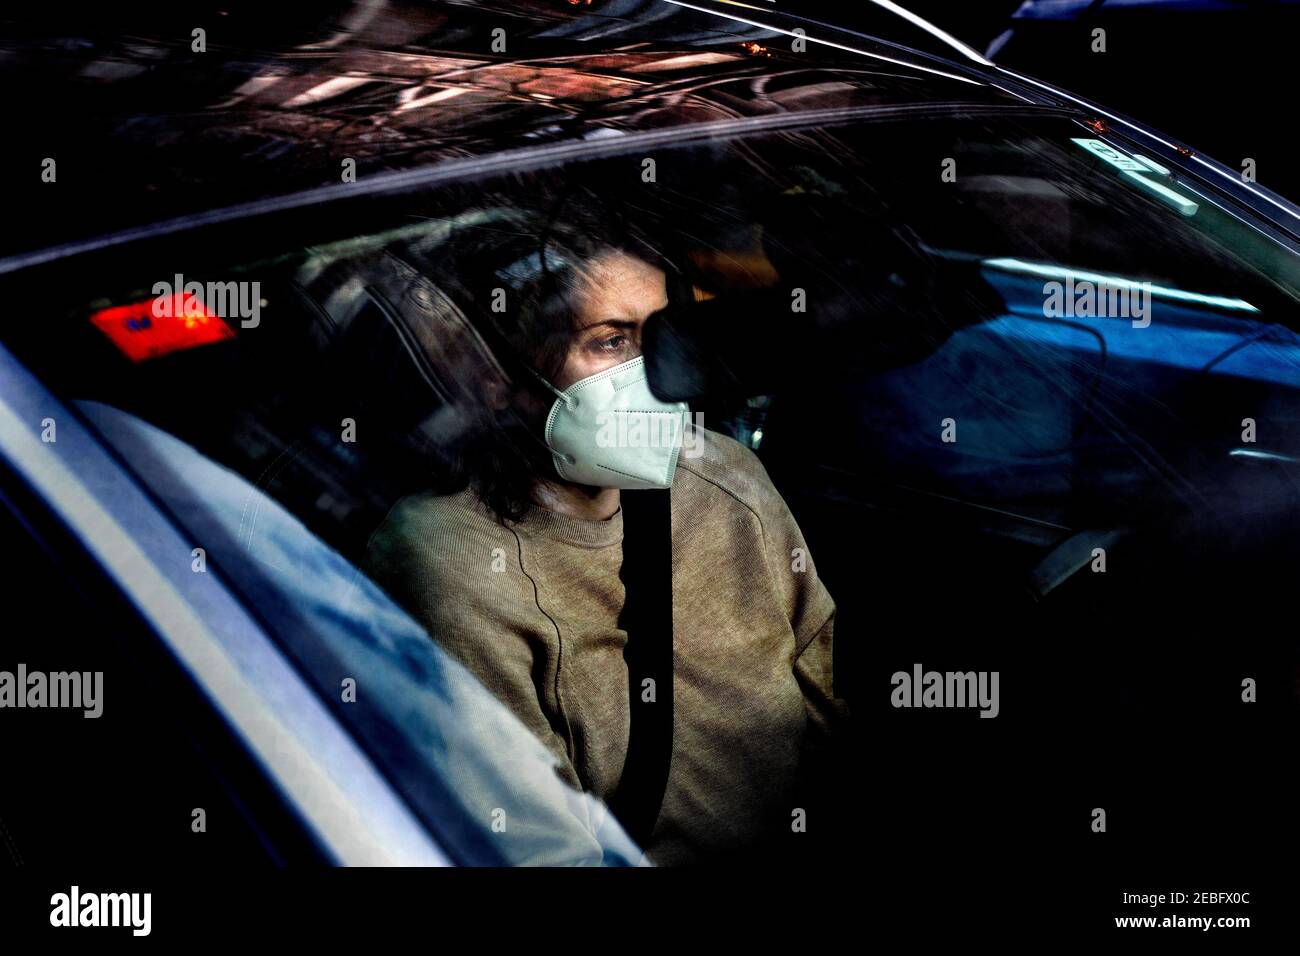 Woman driving car and wearing face mask, Barcelona, Spain. Stock Photo